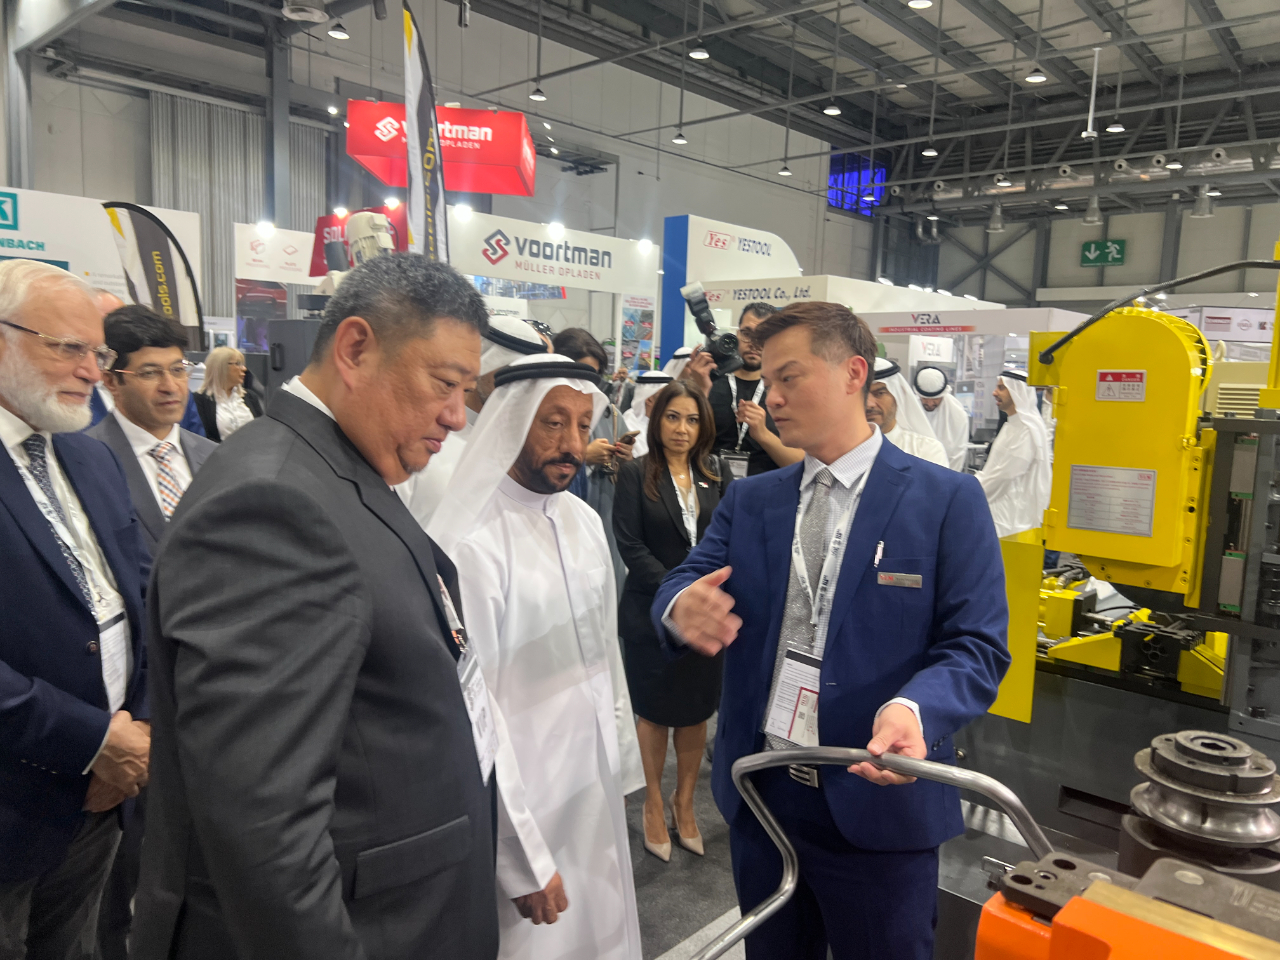 The manager of Ying Han Technology explained the machinery equipment to the Chairman of Sharjah Chamber H.E Abdullah Sultan Al Owais.